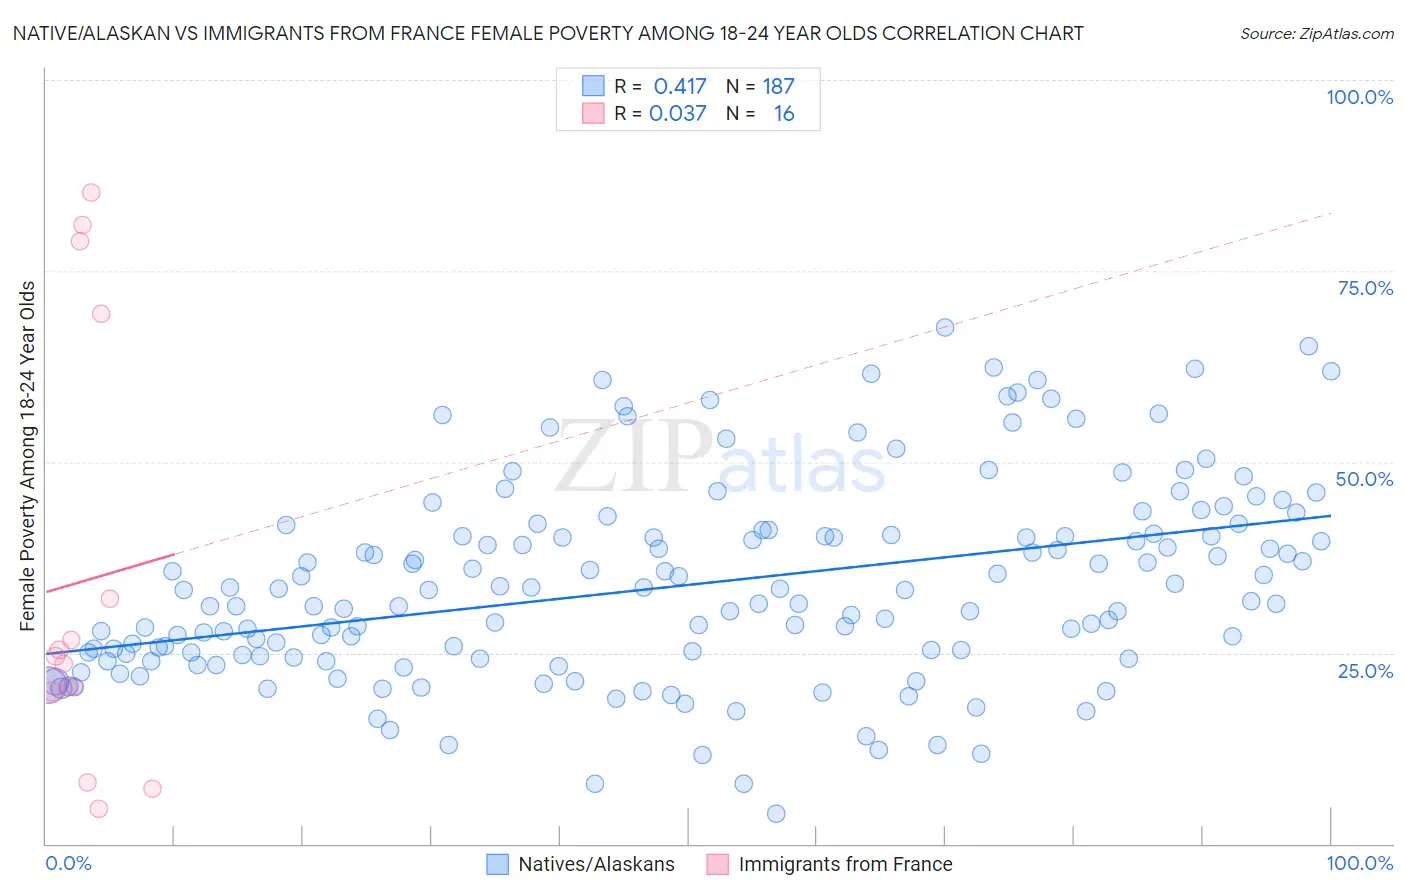 Native/Alaskan vs Immigrants from France Female Poverty Among 18-24 Year Olds